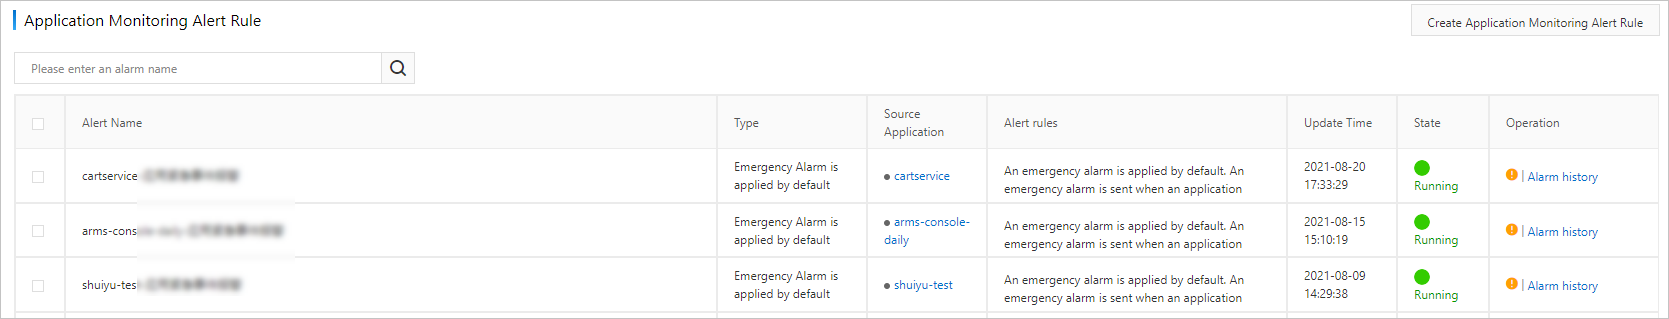 Alert rules for application monitoring